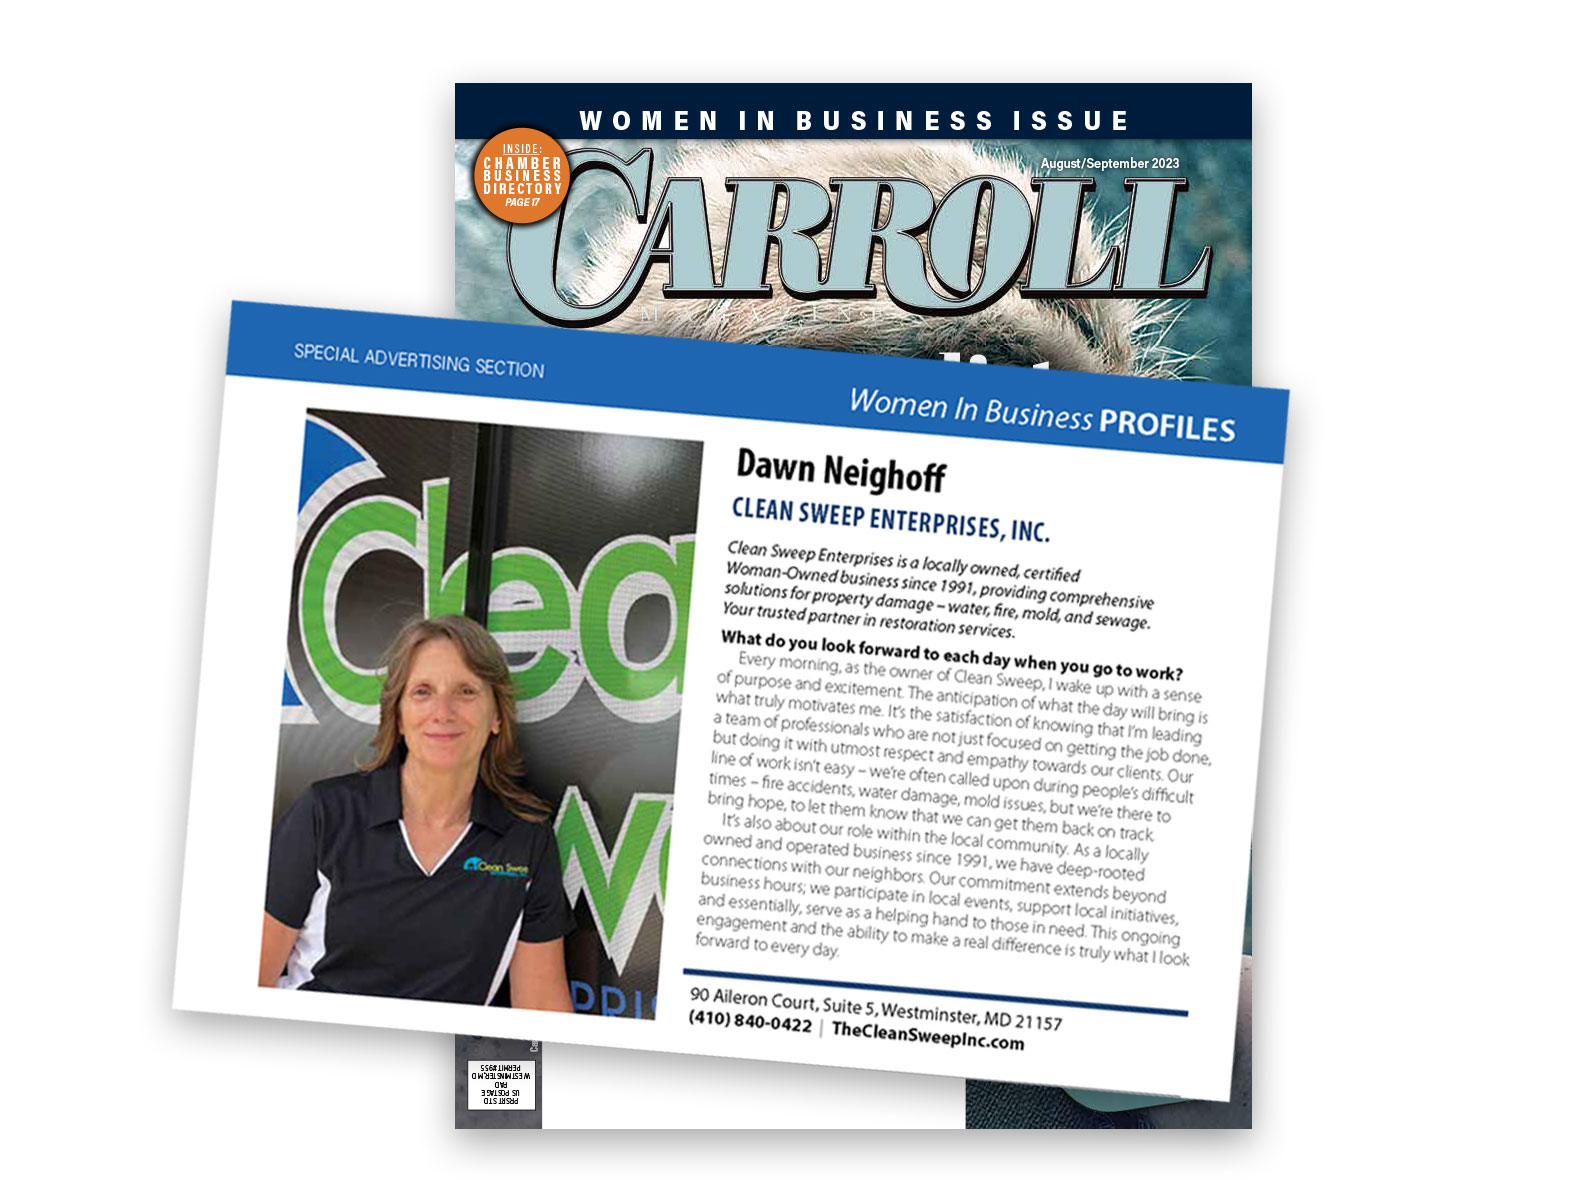 Carroll Magazine Feature - August/September 2023 Issue